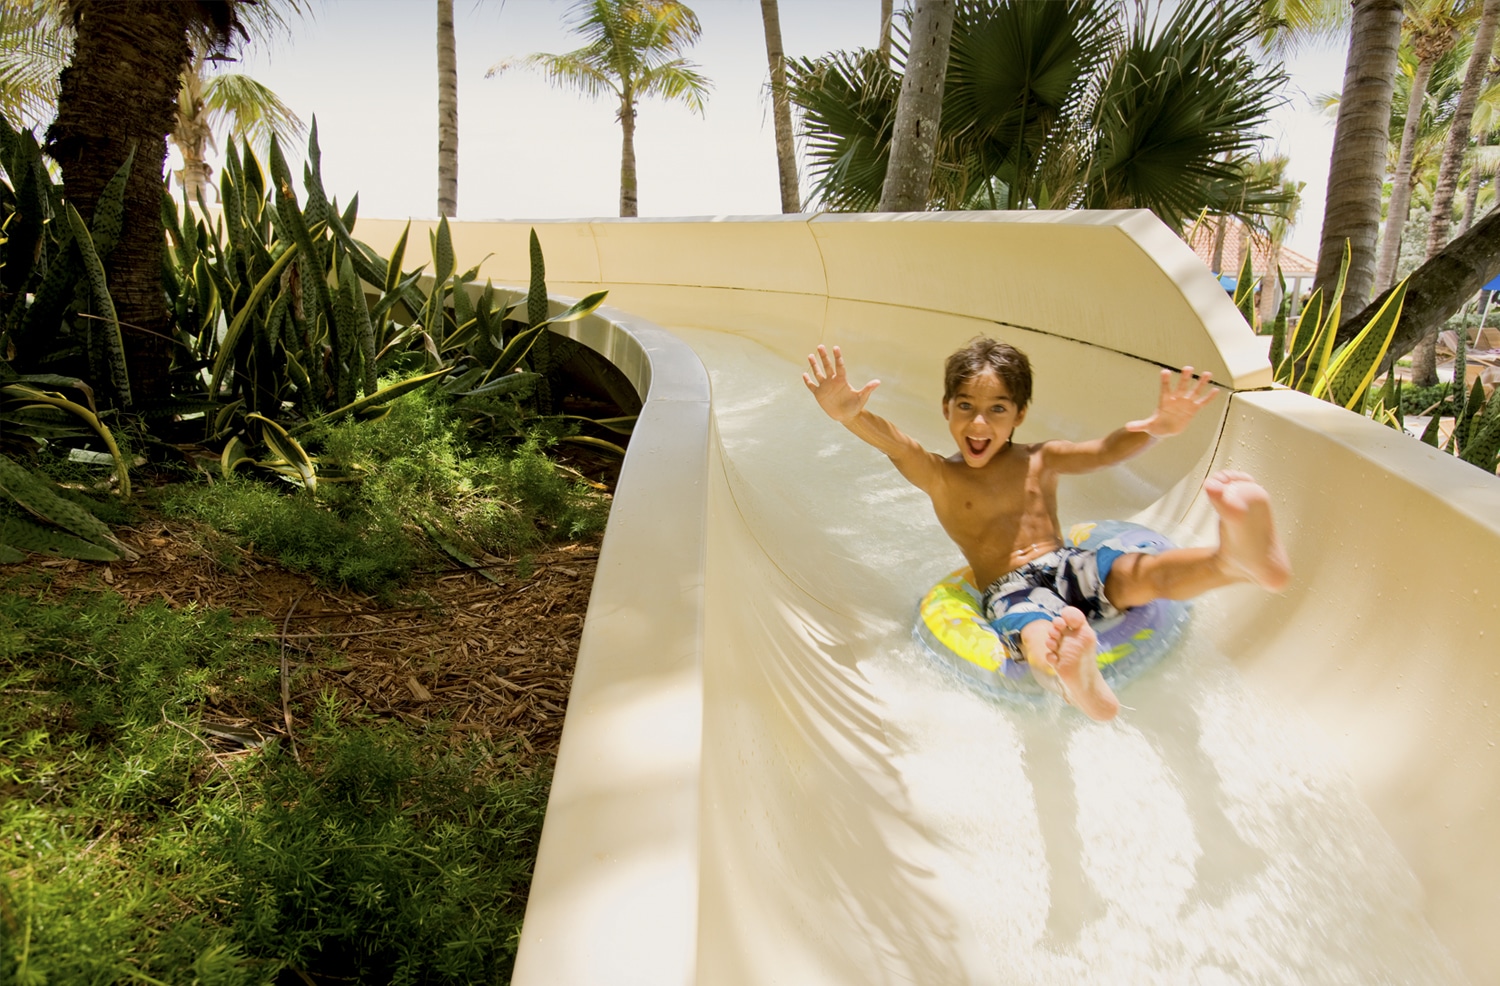 Family Activities in Puerto Rico | Things to Do in Puerto Rico | Best Family Vacation | Waterslide